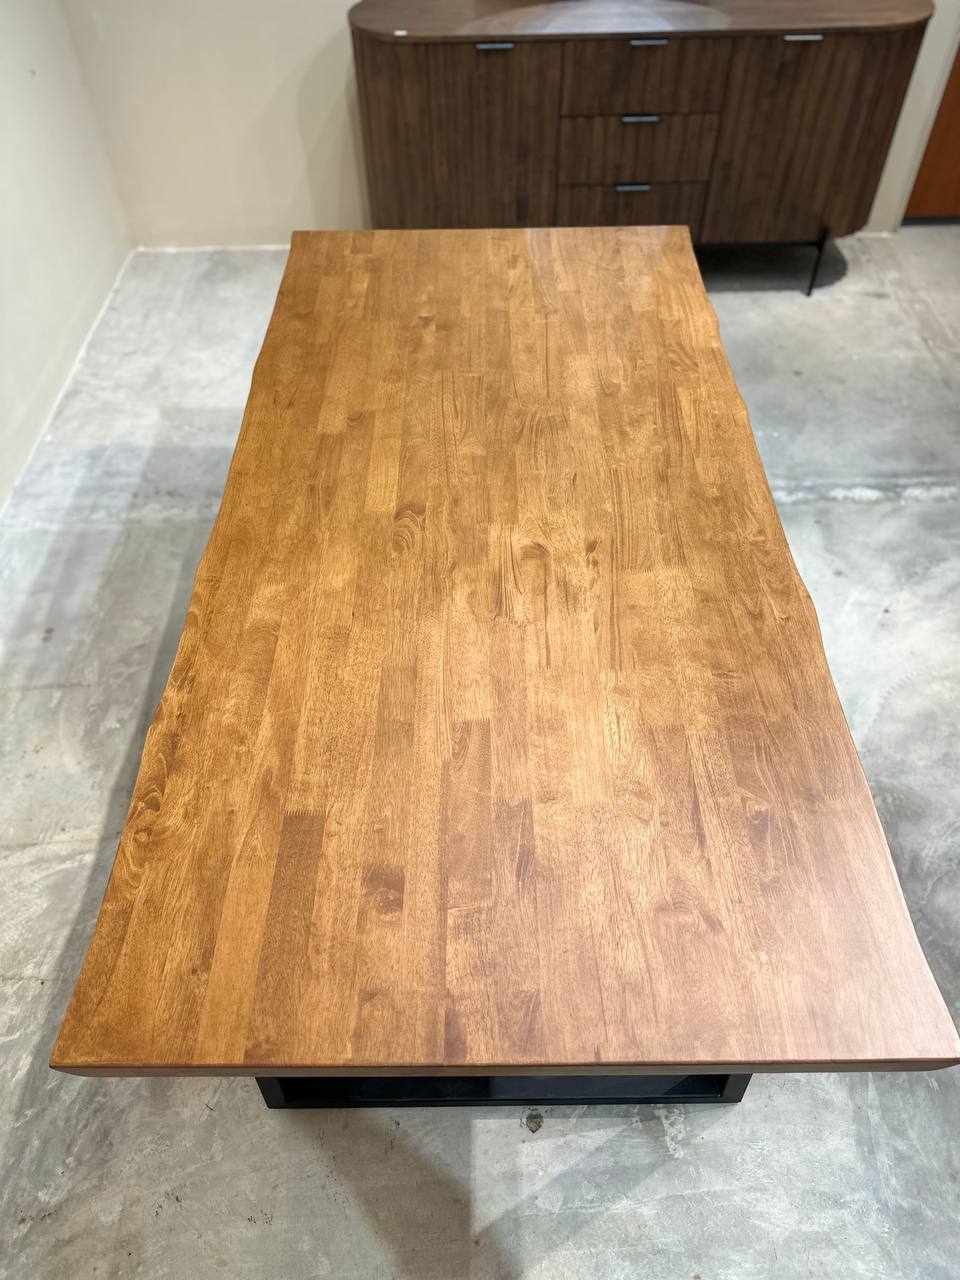 Serena Live Edge Dining Table